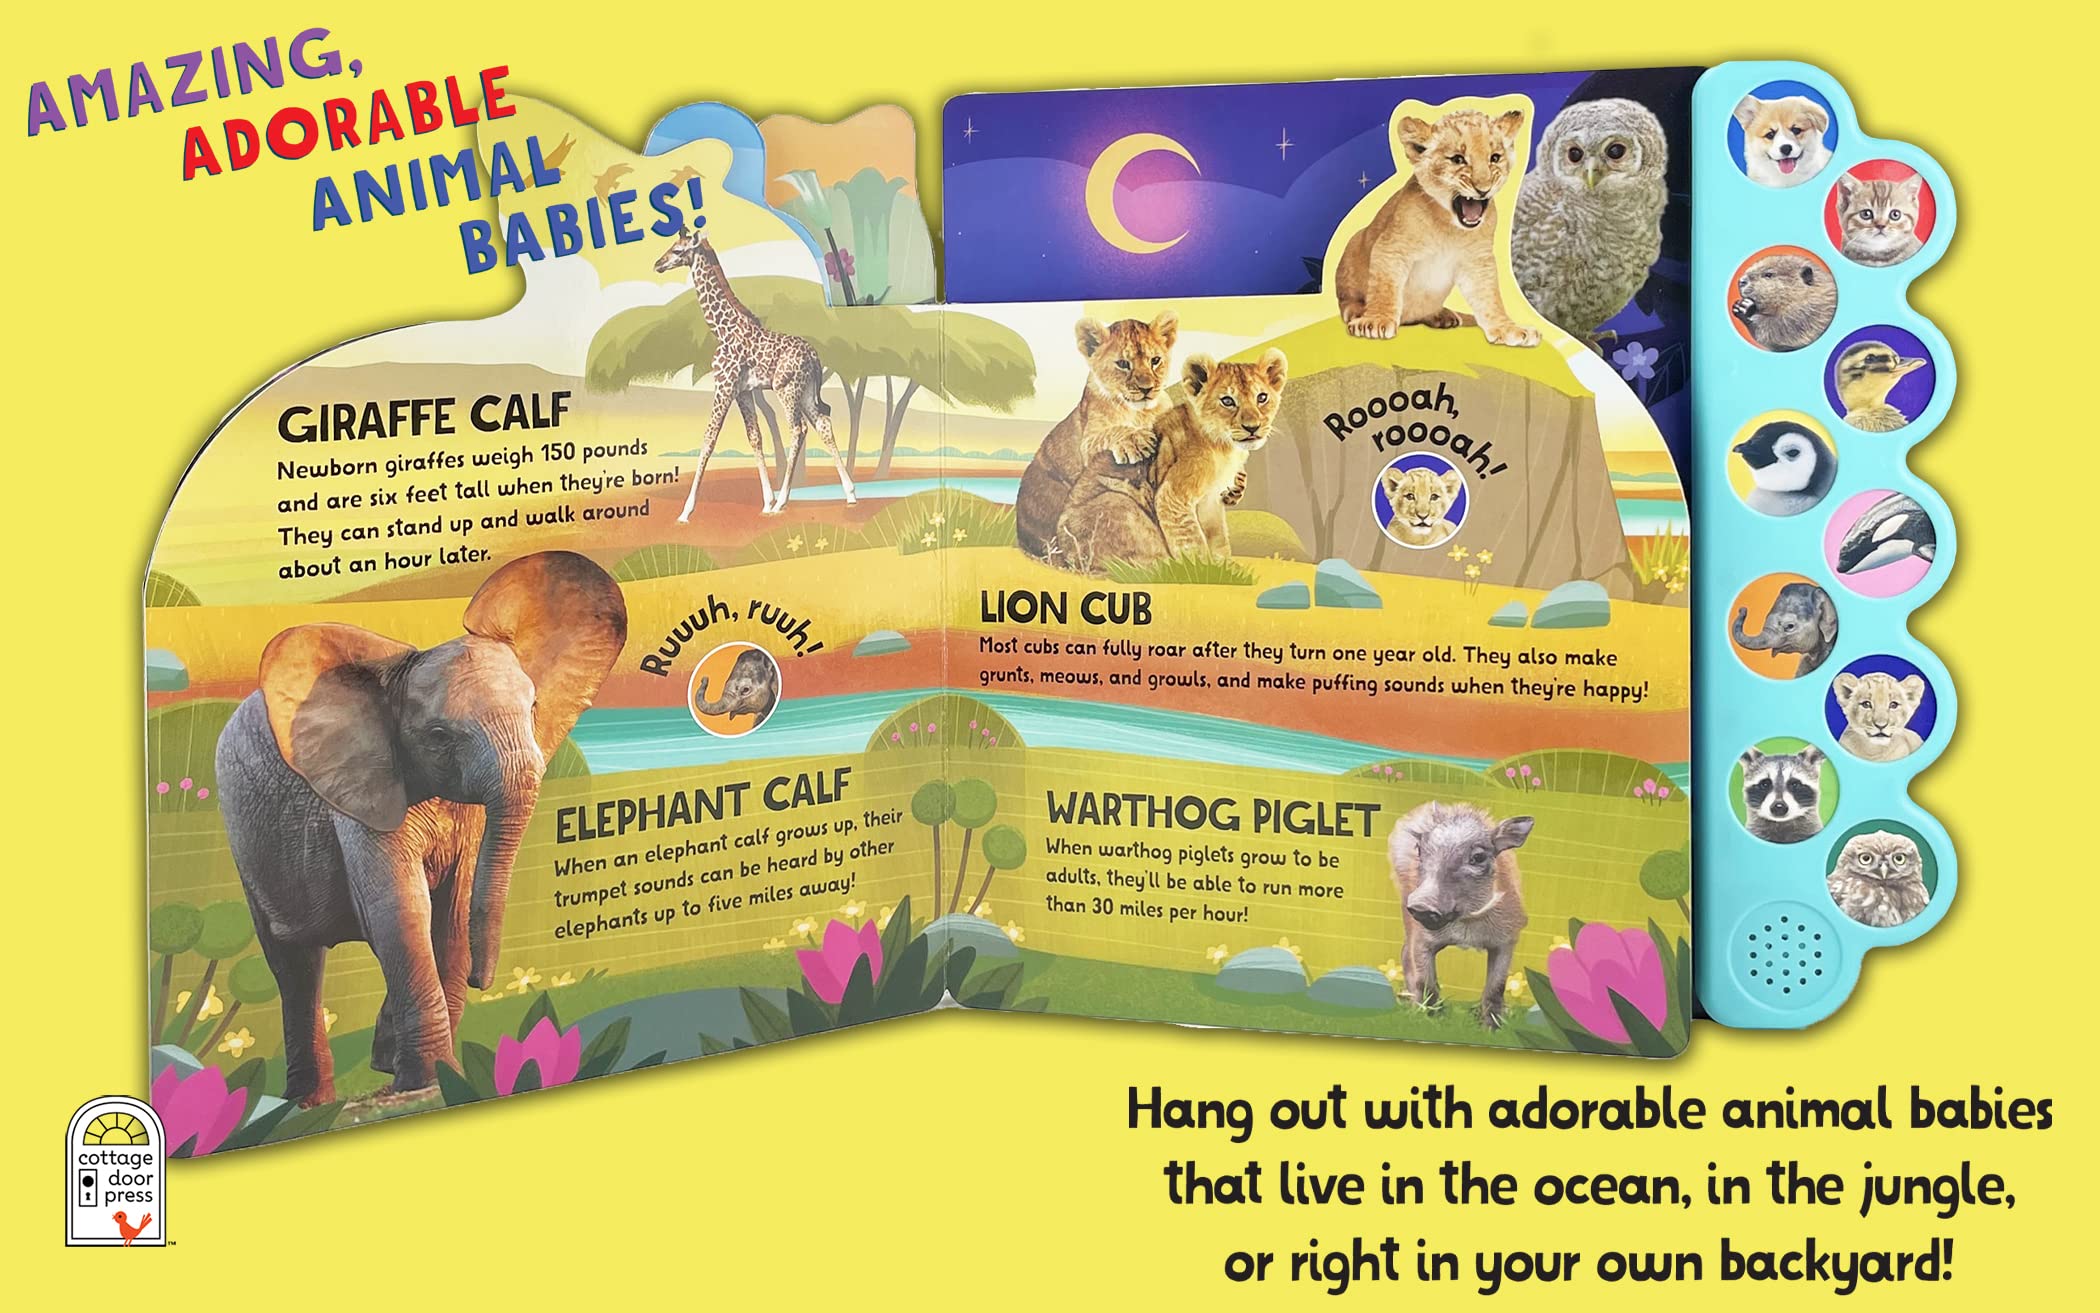 Amazing, Adorable Animal Babies: Listen to Baby Animal Sounds - 10-Button Sound Book for Toddlers and Children